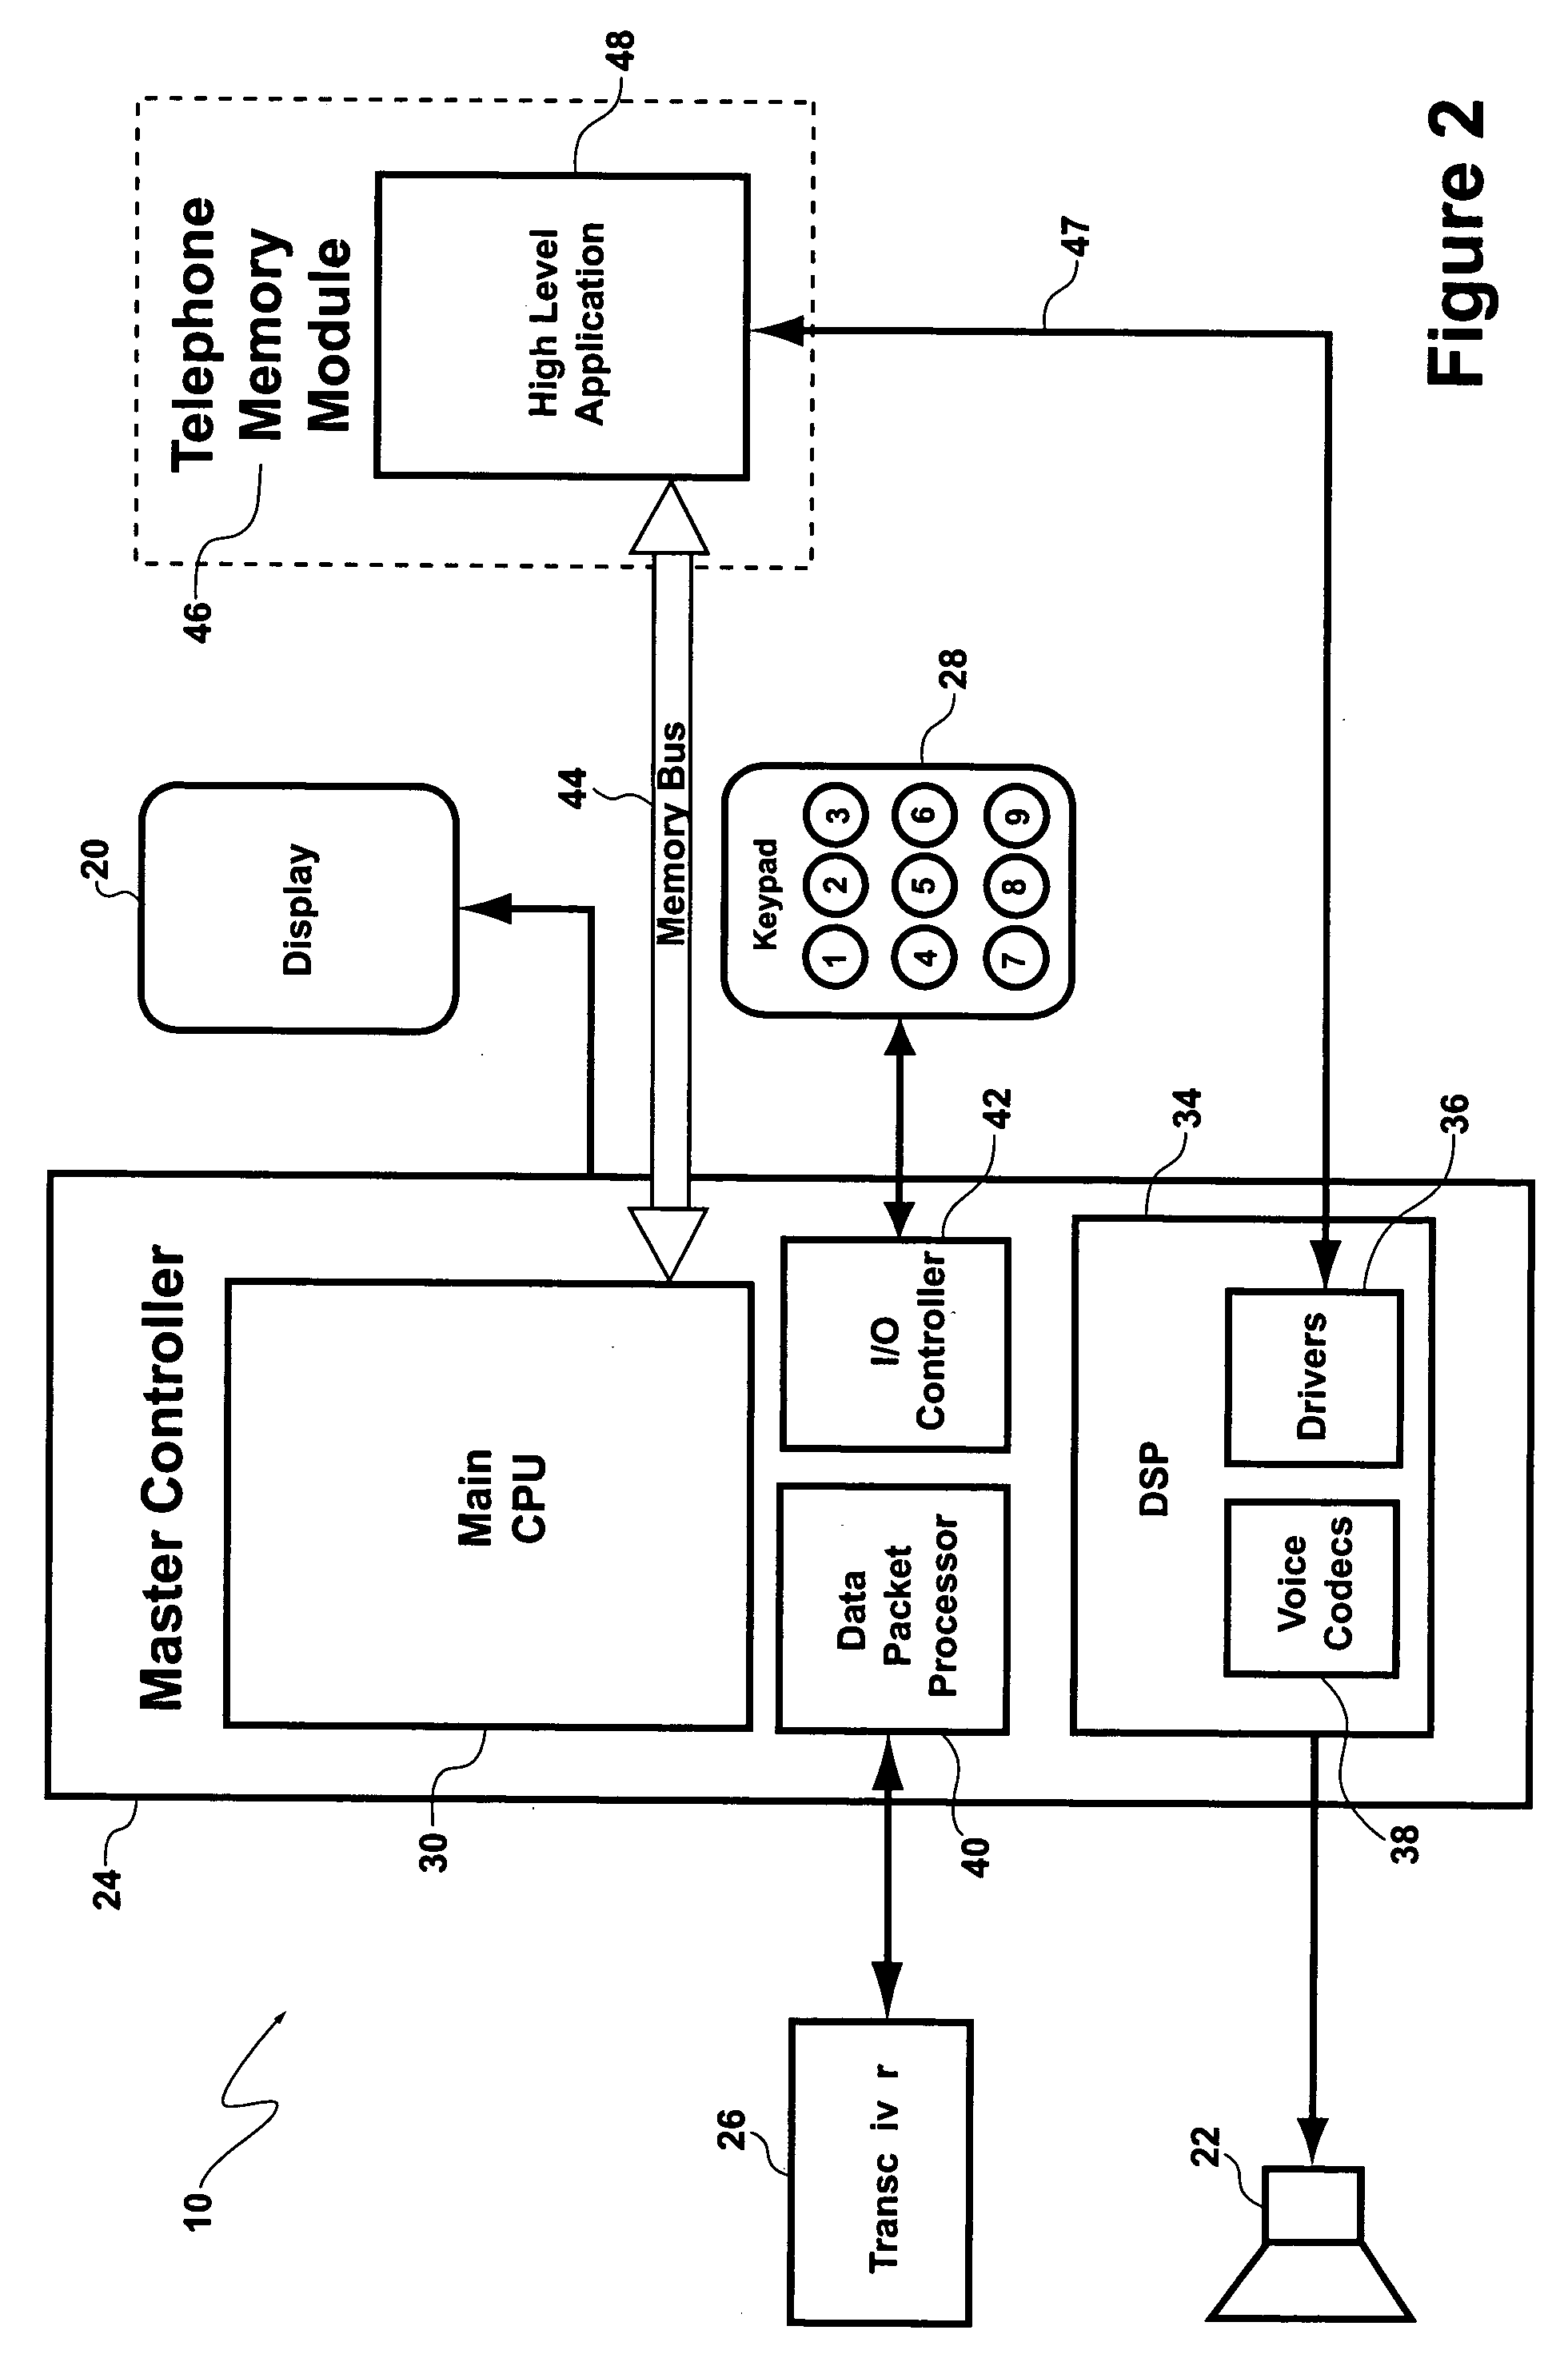 Multimedia data streaming in a single threaded mobile communication device operating environment